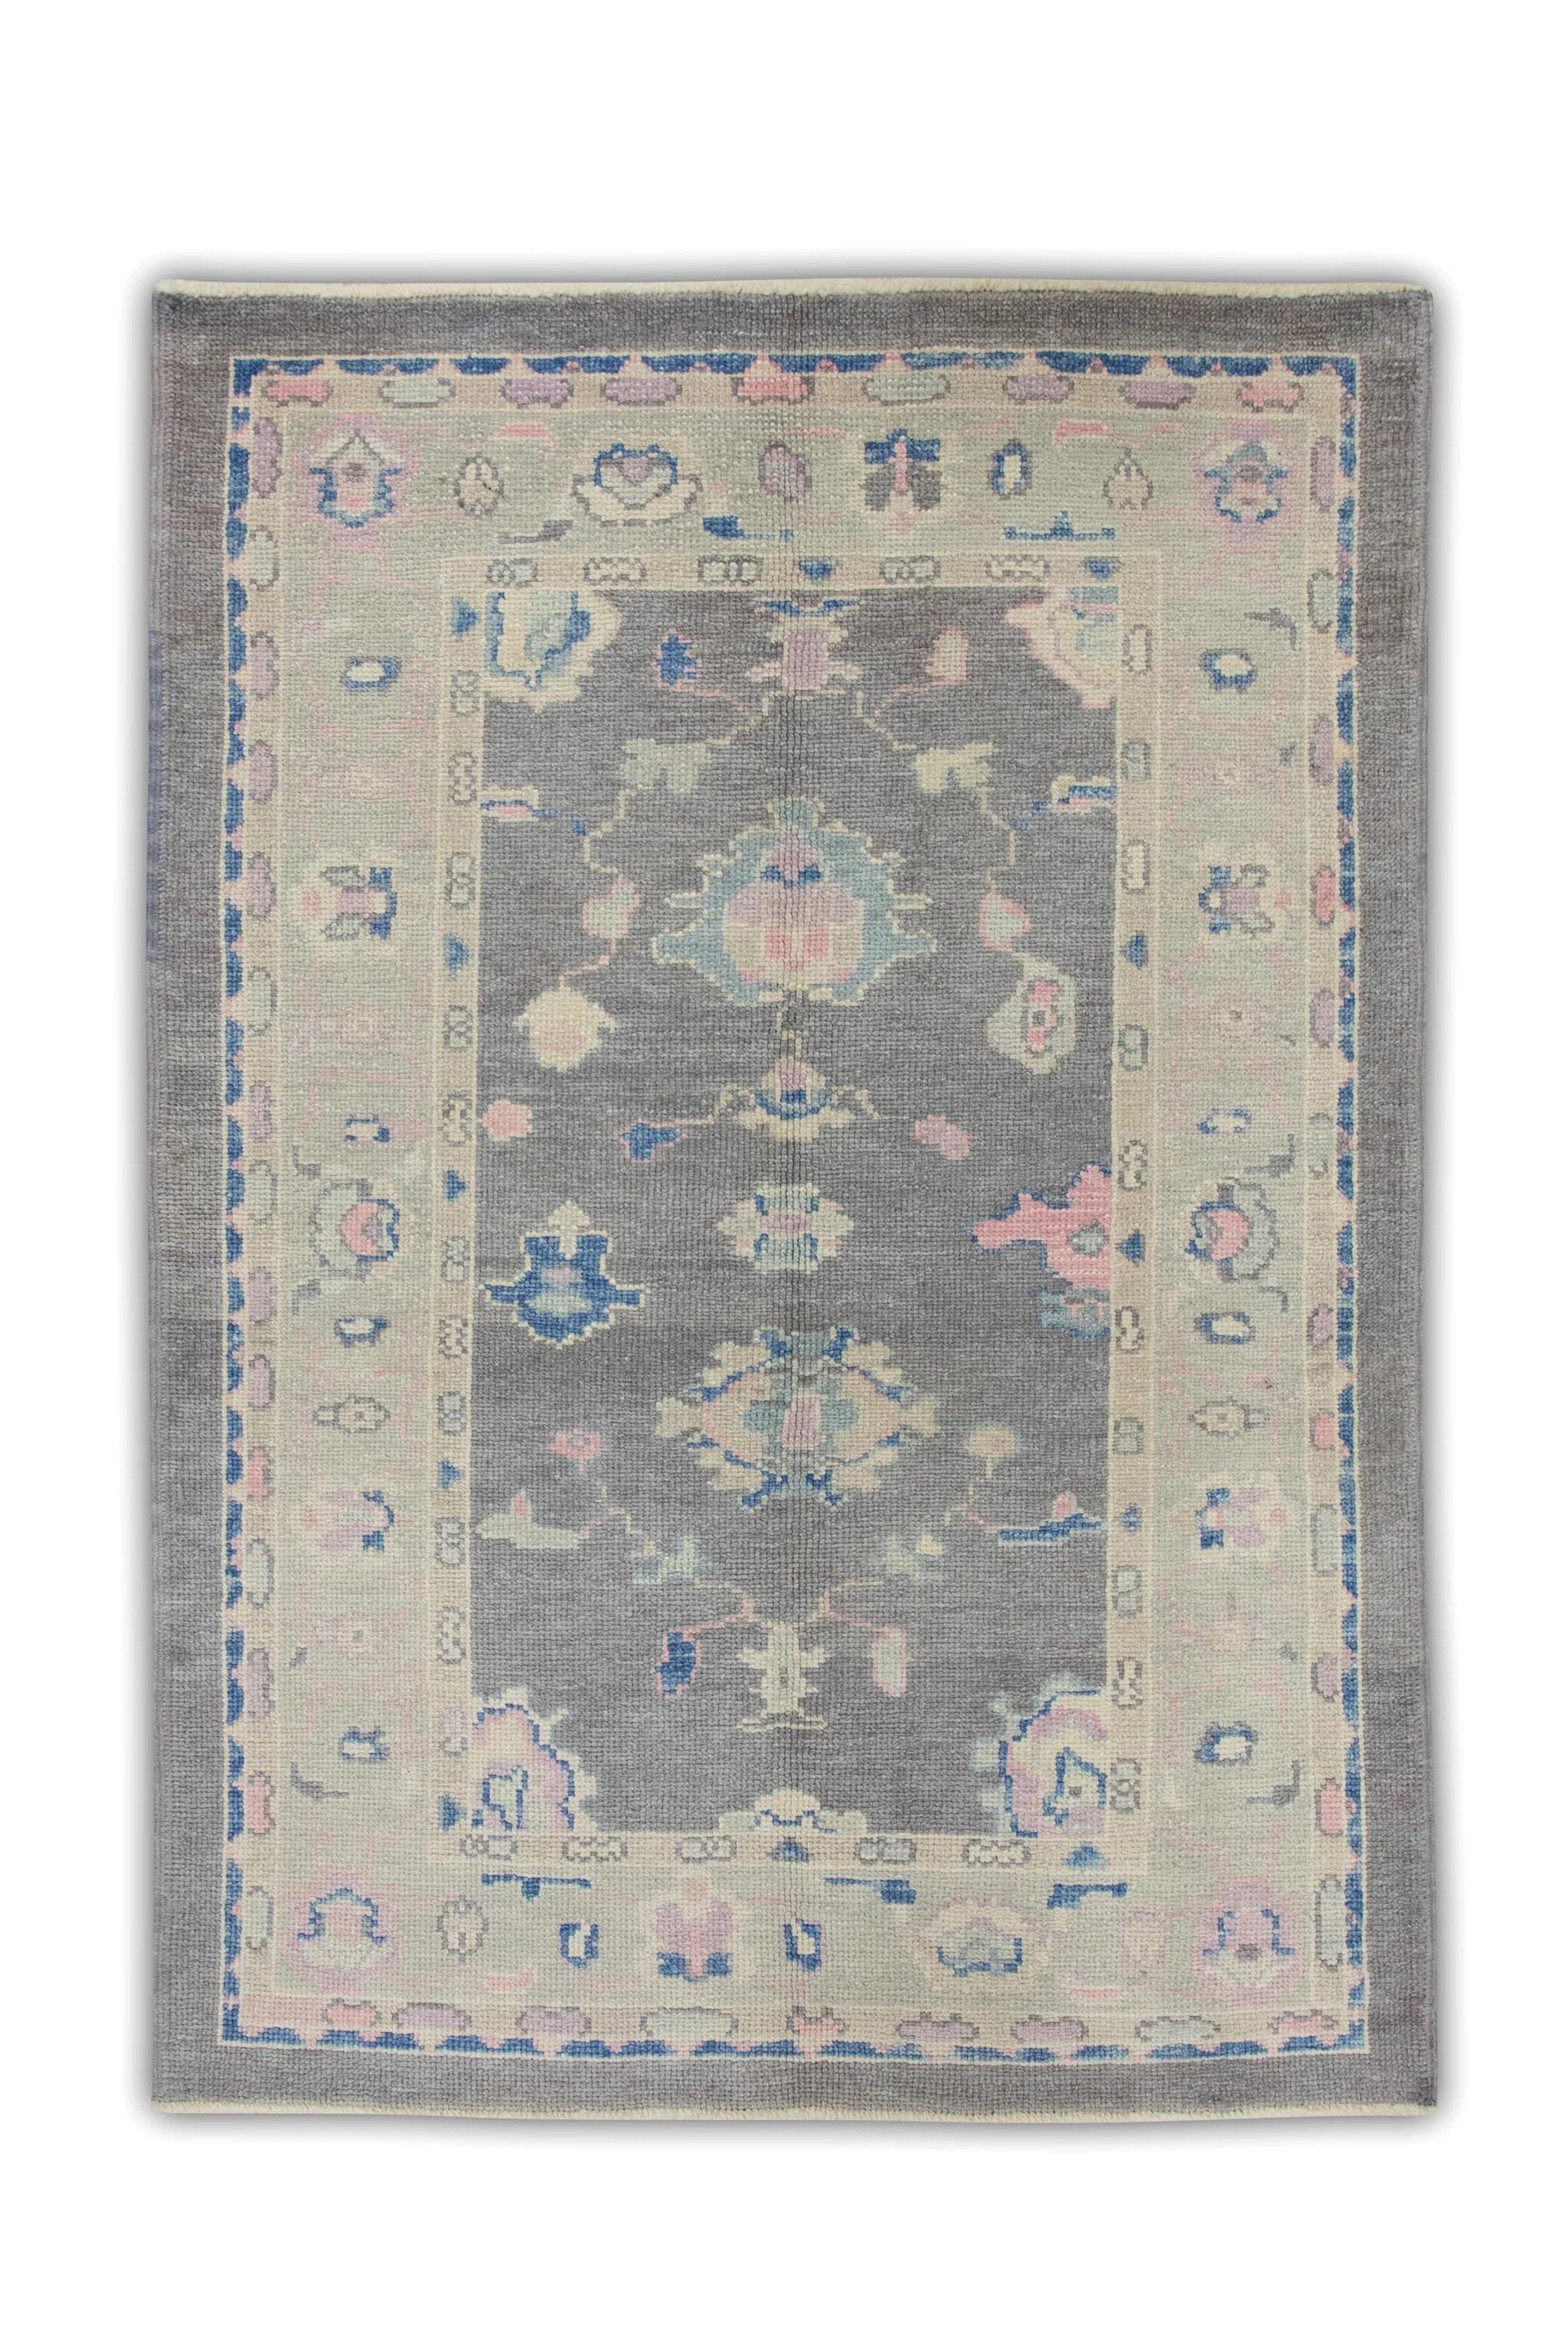 Contemporary Dark Mauve Handwoven Wool Turkish Oushak Rug in Colorful Floral Design 4' x 5'11 For Sale